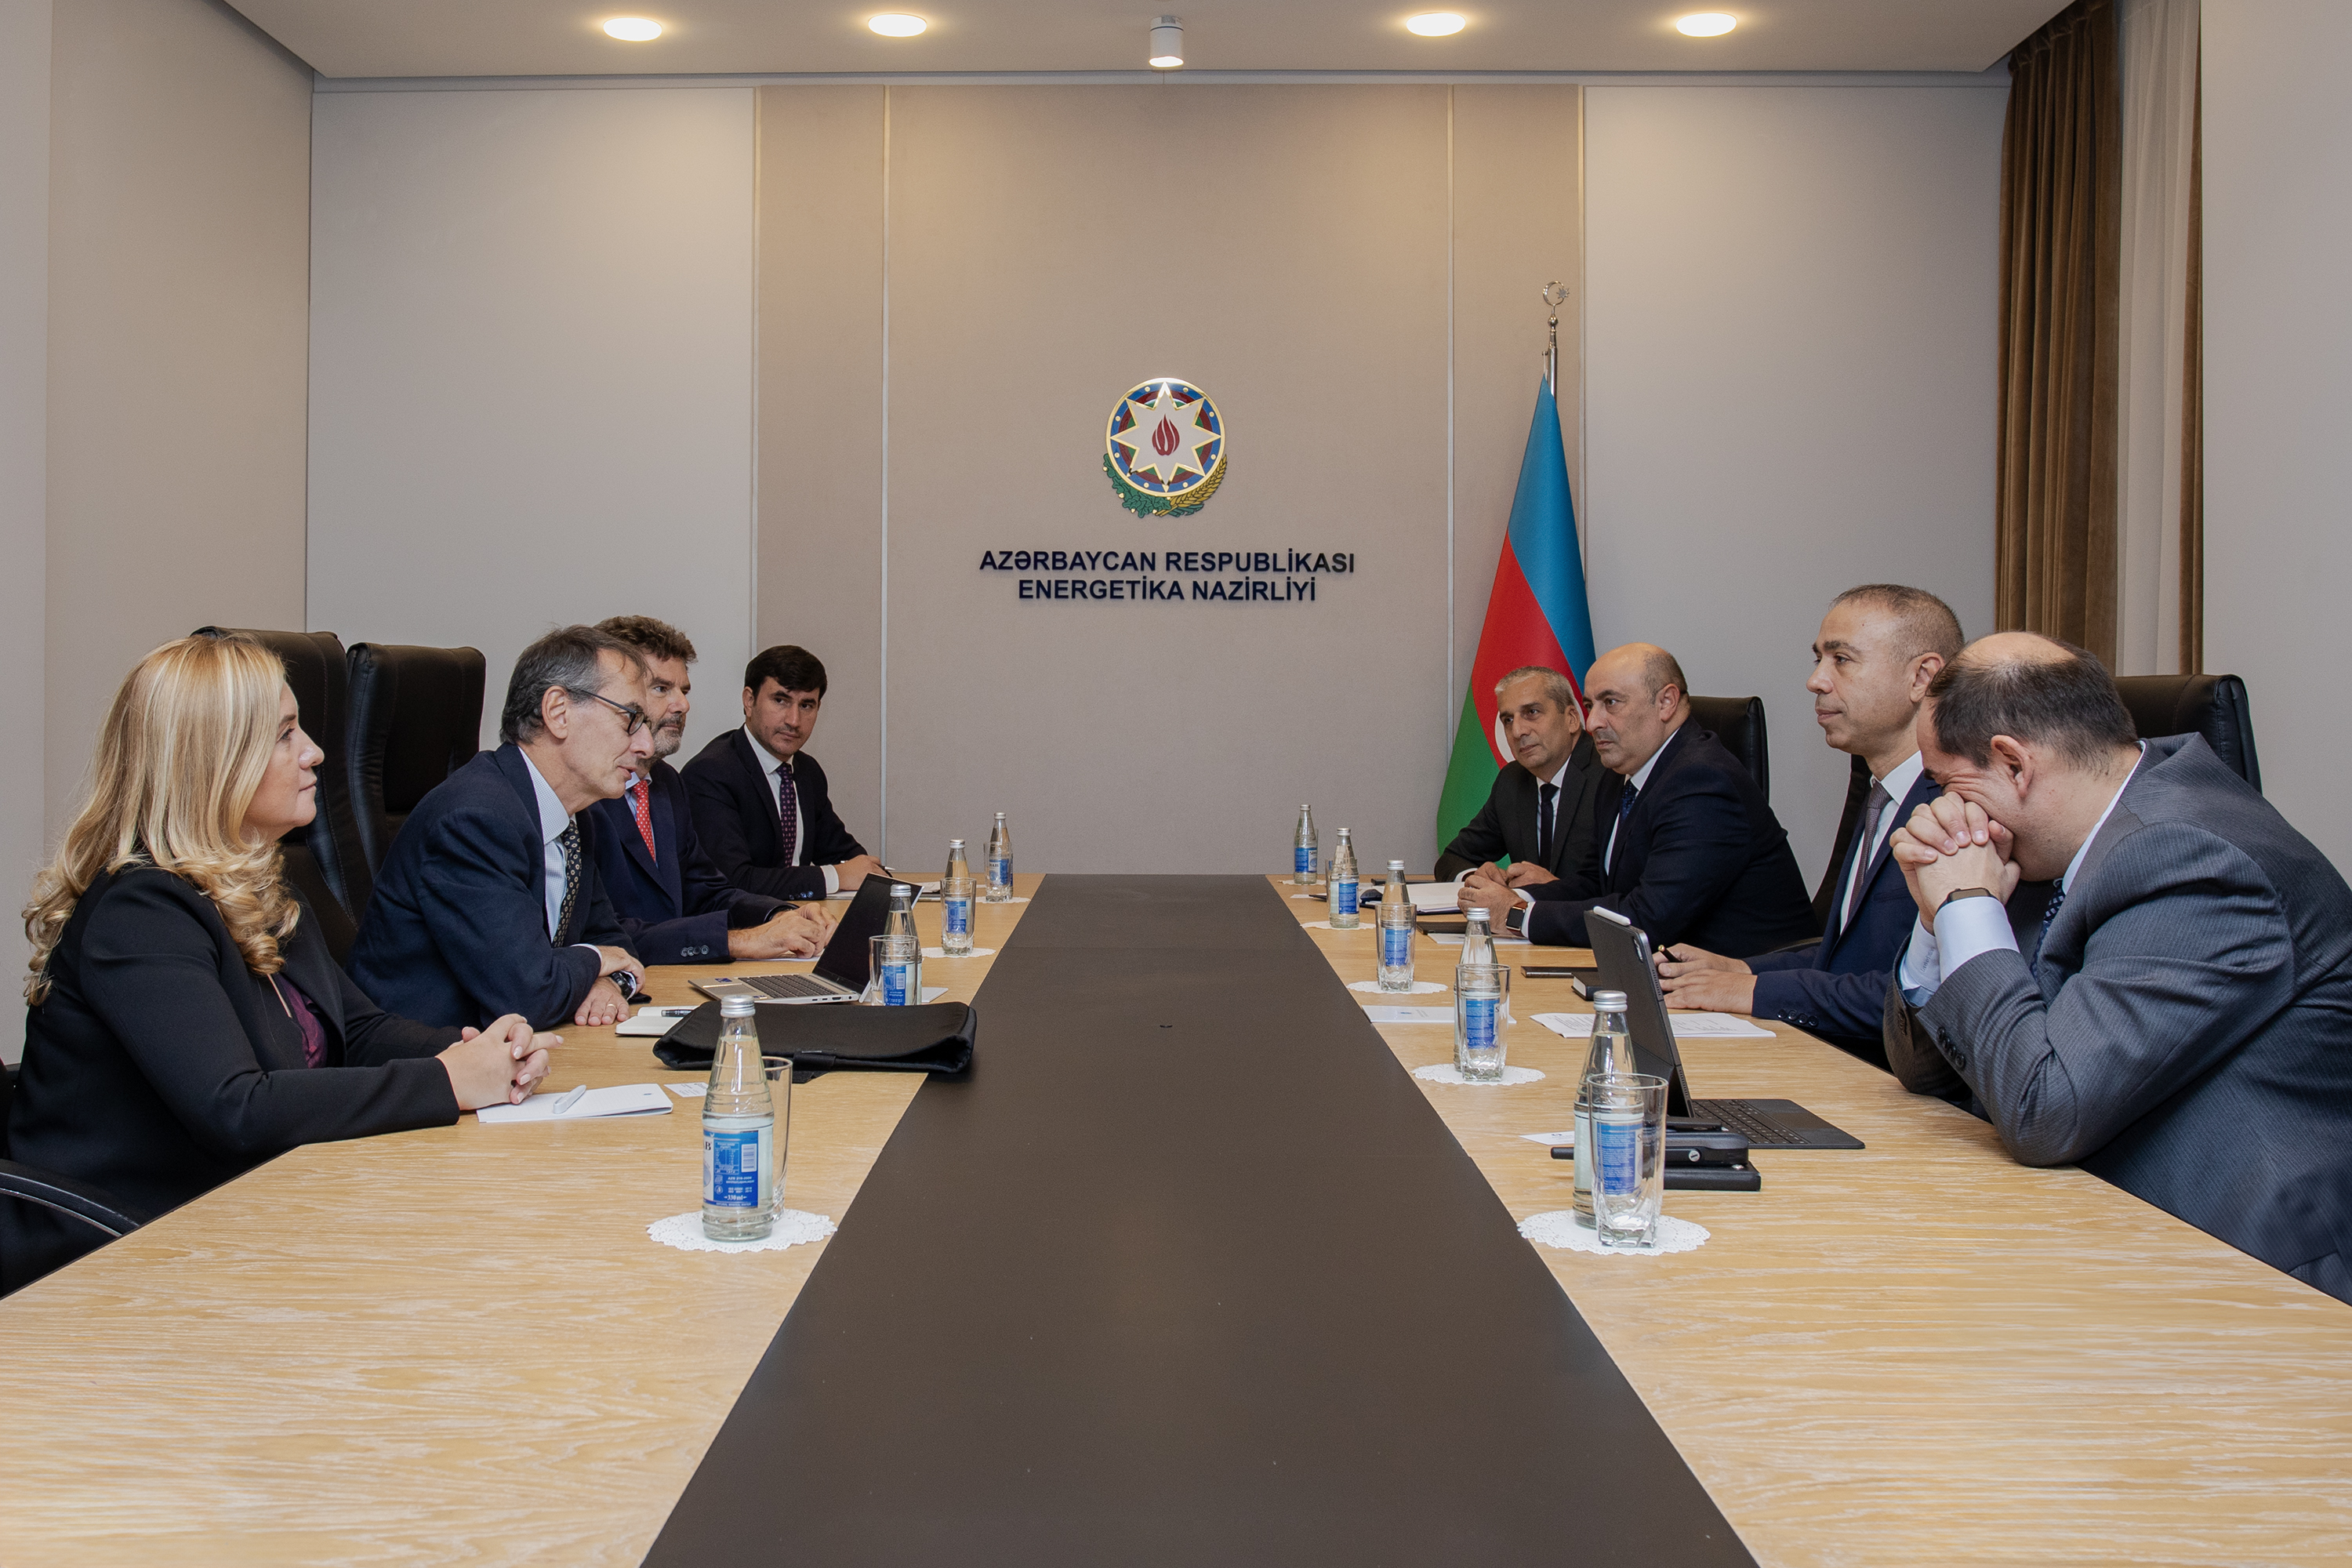  Issues arising from existing cooperation with EBRD discussed